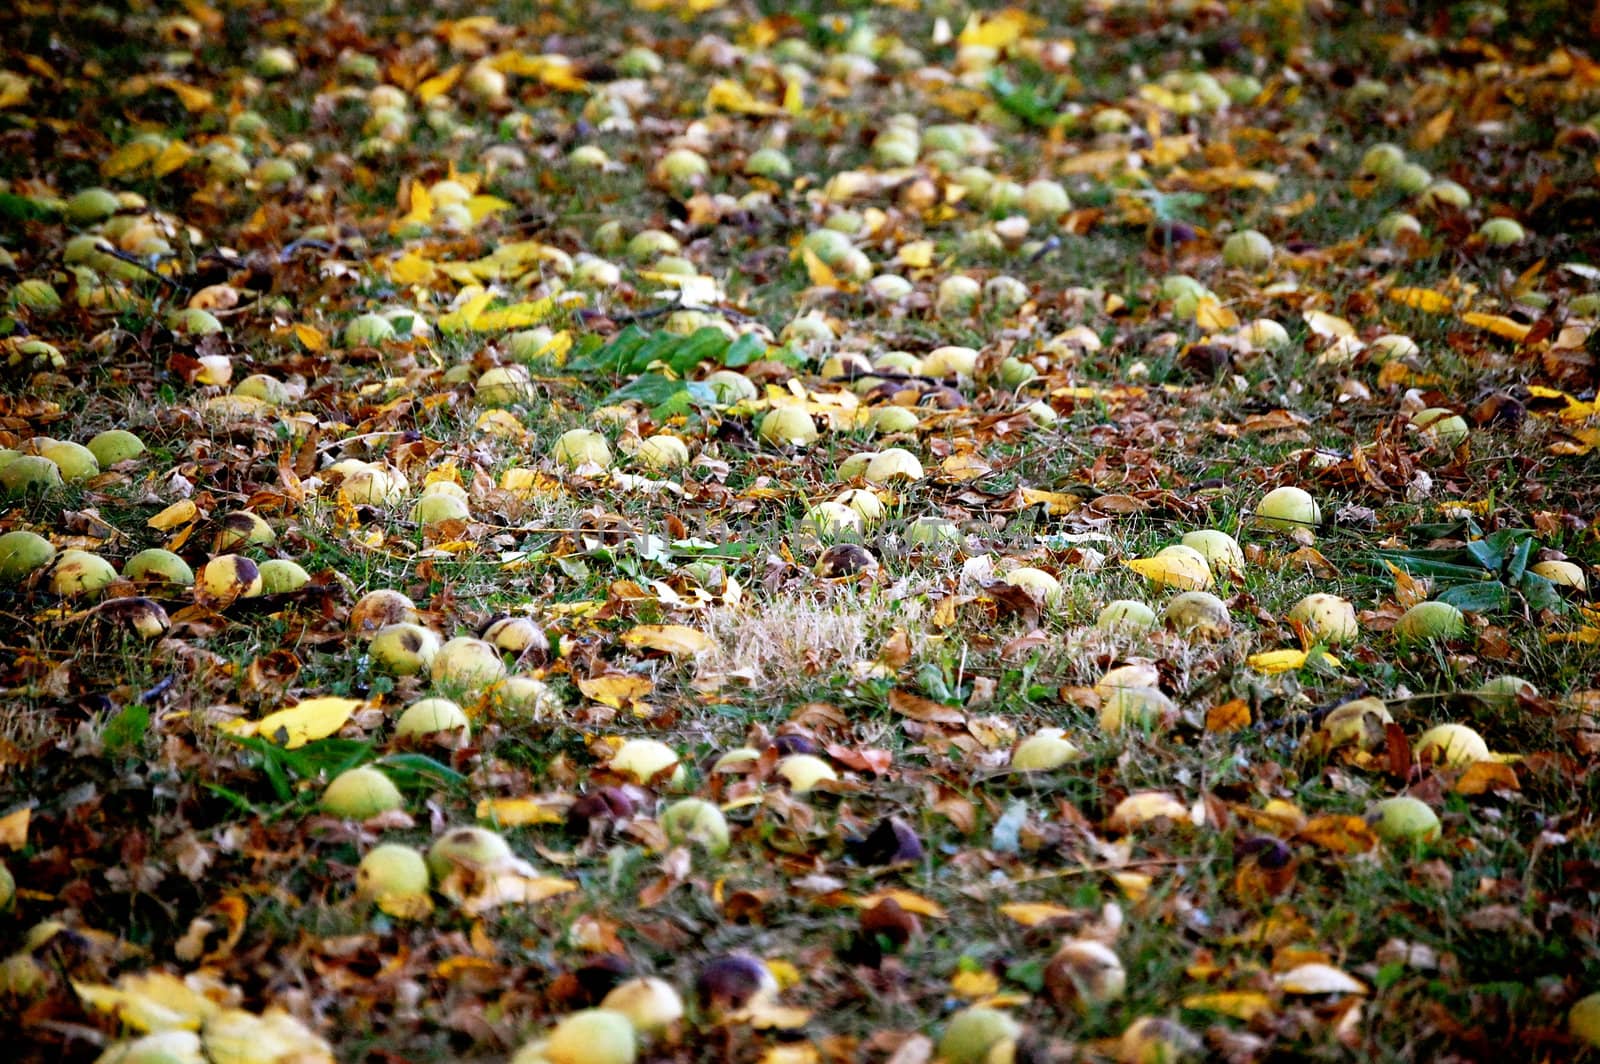 Hickory nuts on the ground